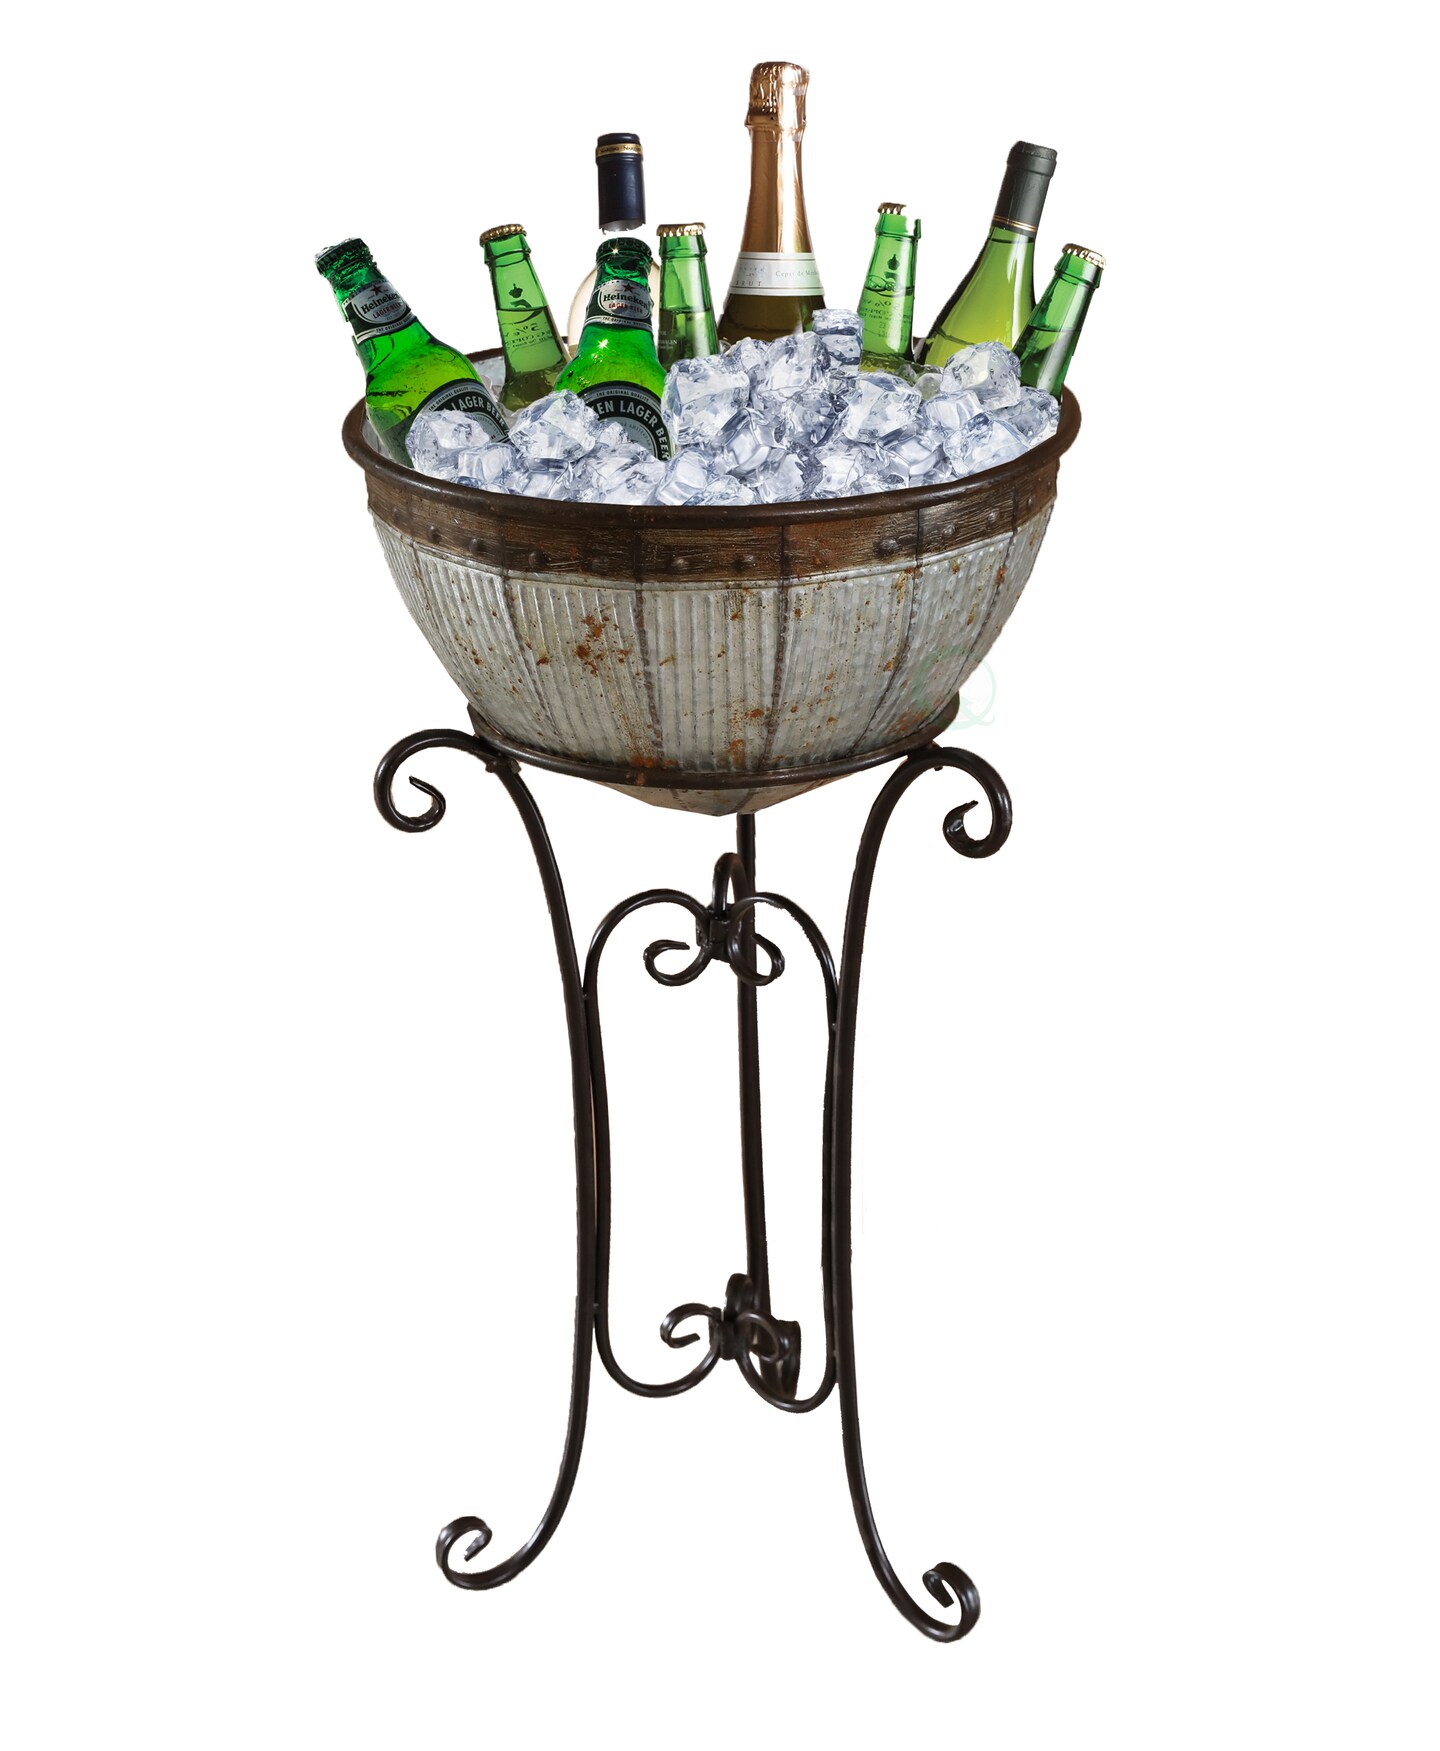 Galvanized Metal Beverage Cooler Tub with Stand